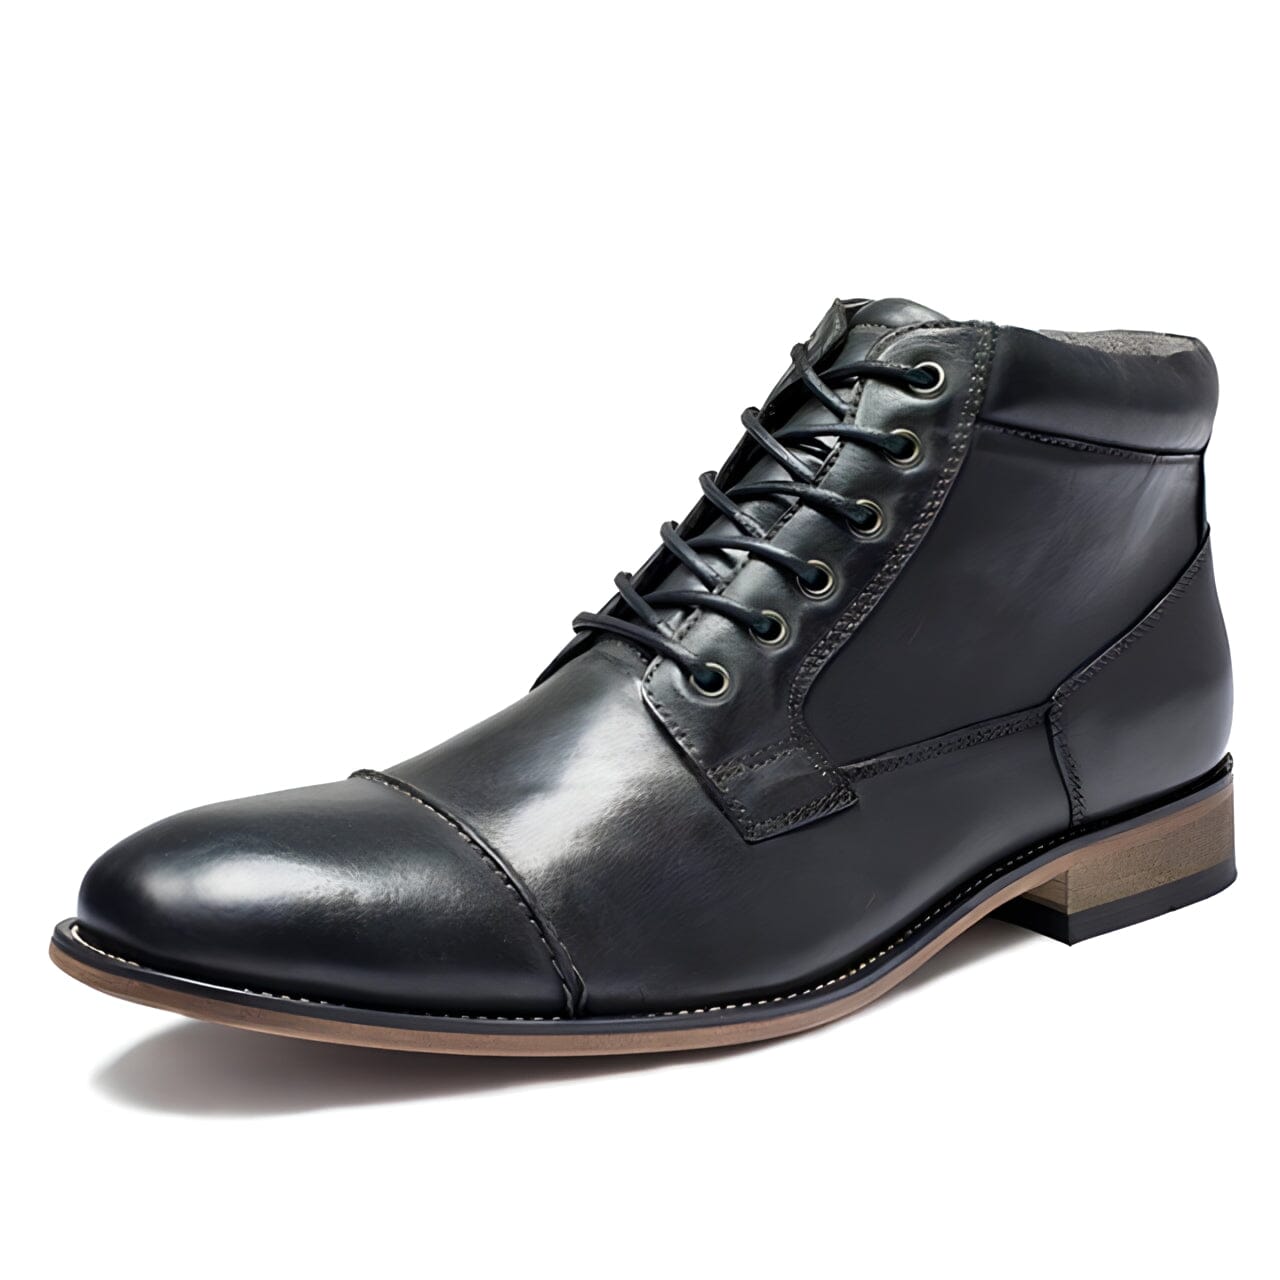 The Carlton Oxford Ankle Boots - Black Well Worn EU 46 / US 13 